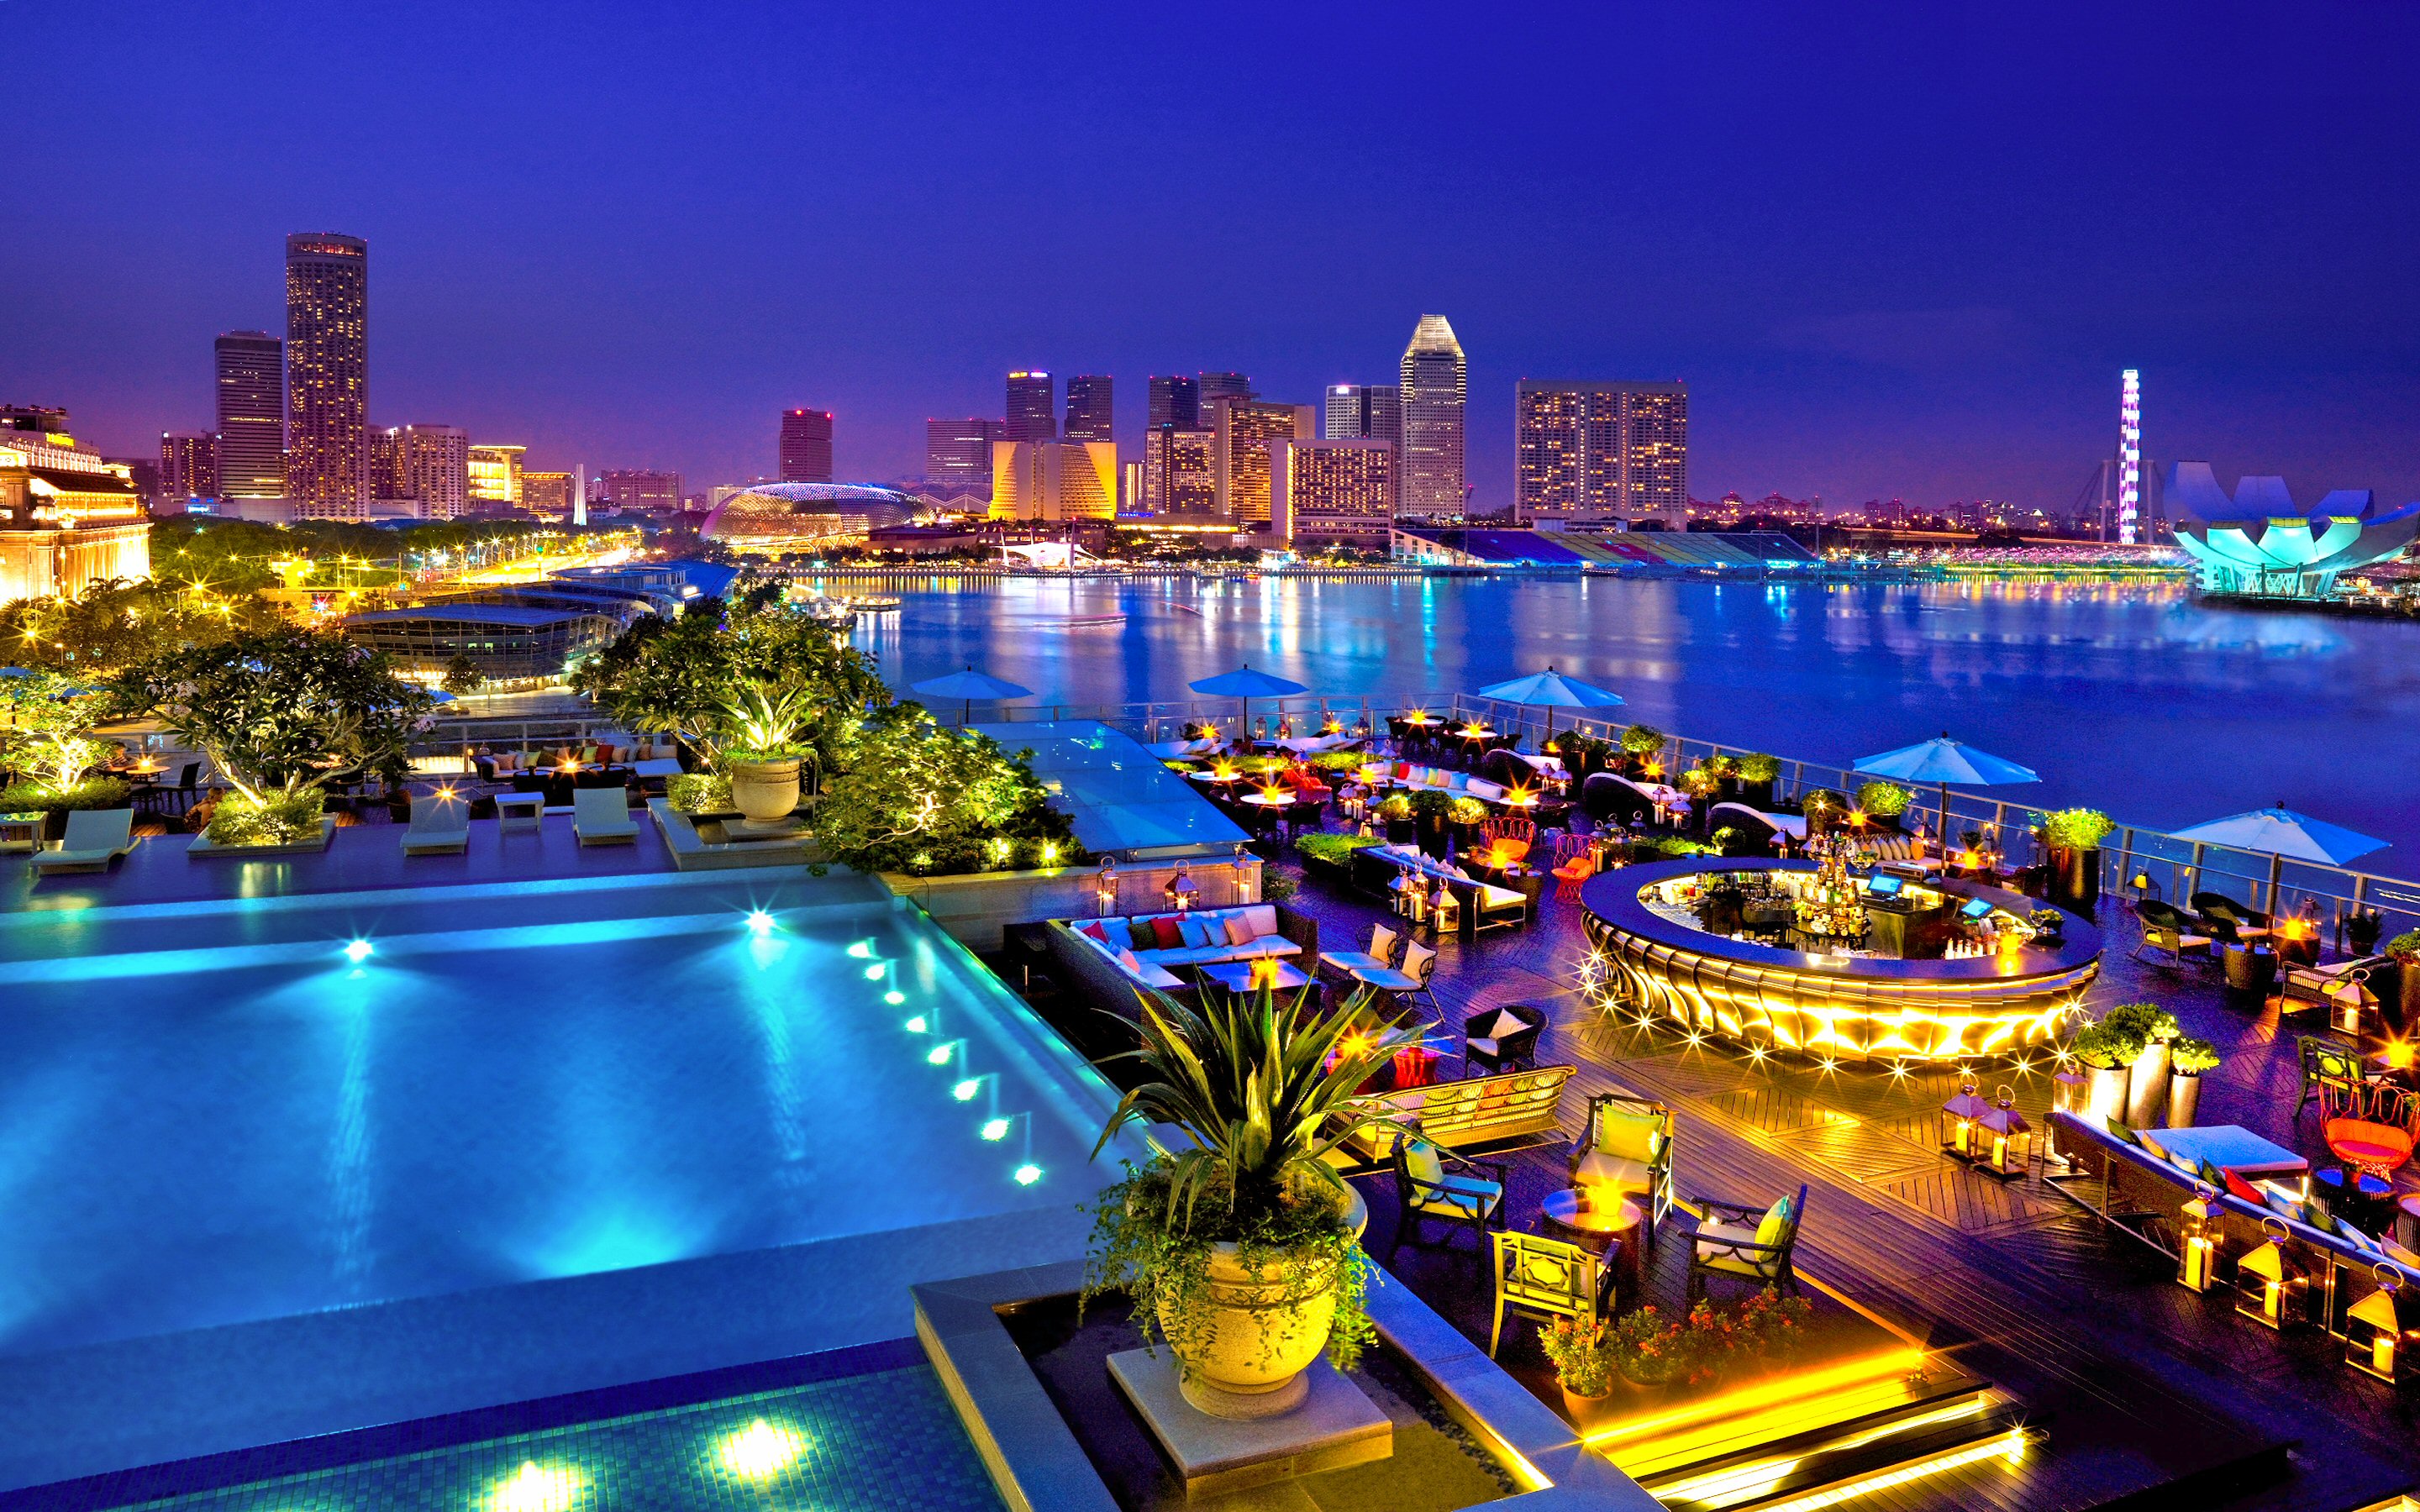 Azure Bay Colorful Pool Reflection Rooftop Singapore 2880x1800